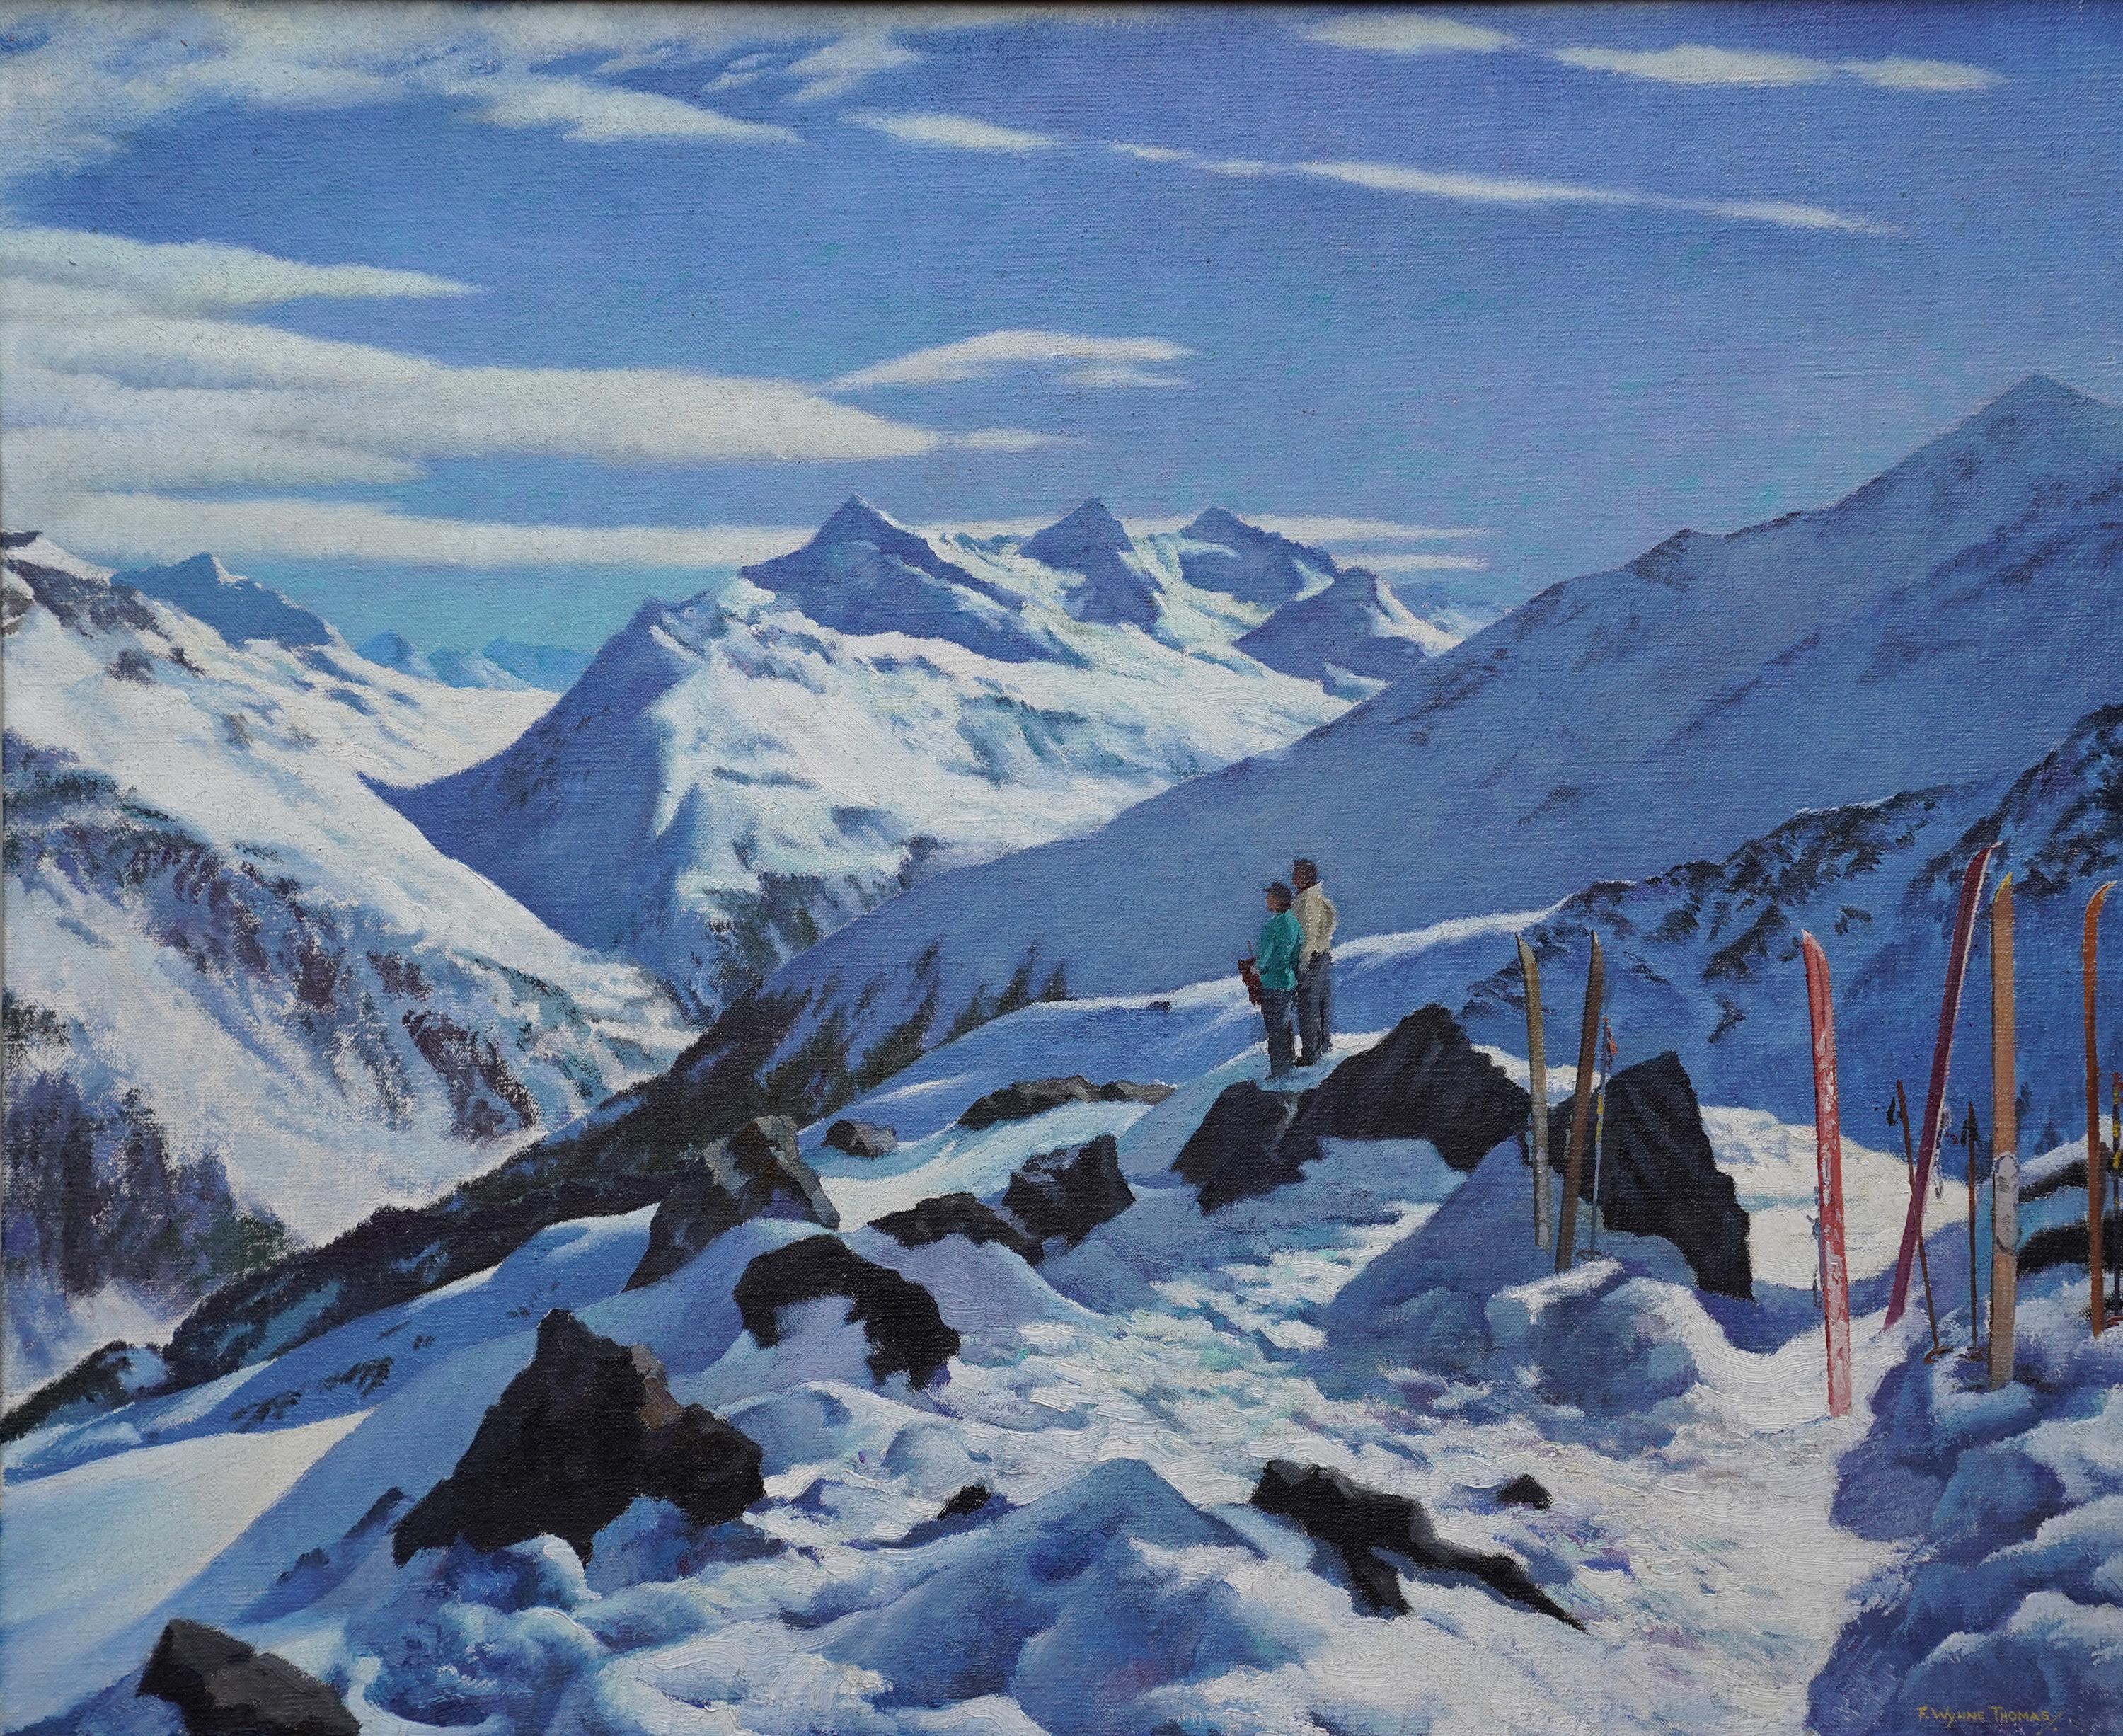 Couple in a Snowy Mountainous Landscape - British 1940's art skiing oil painting - Painting by Francis Wynne Thomas